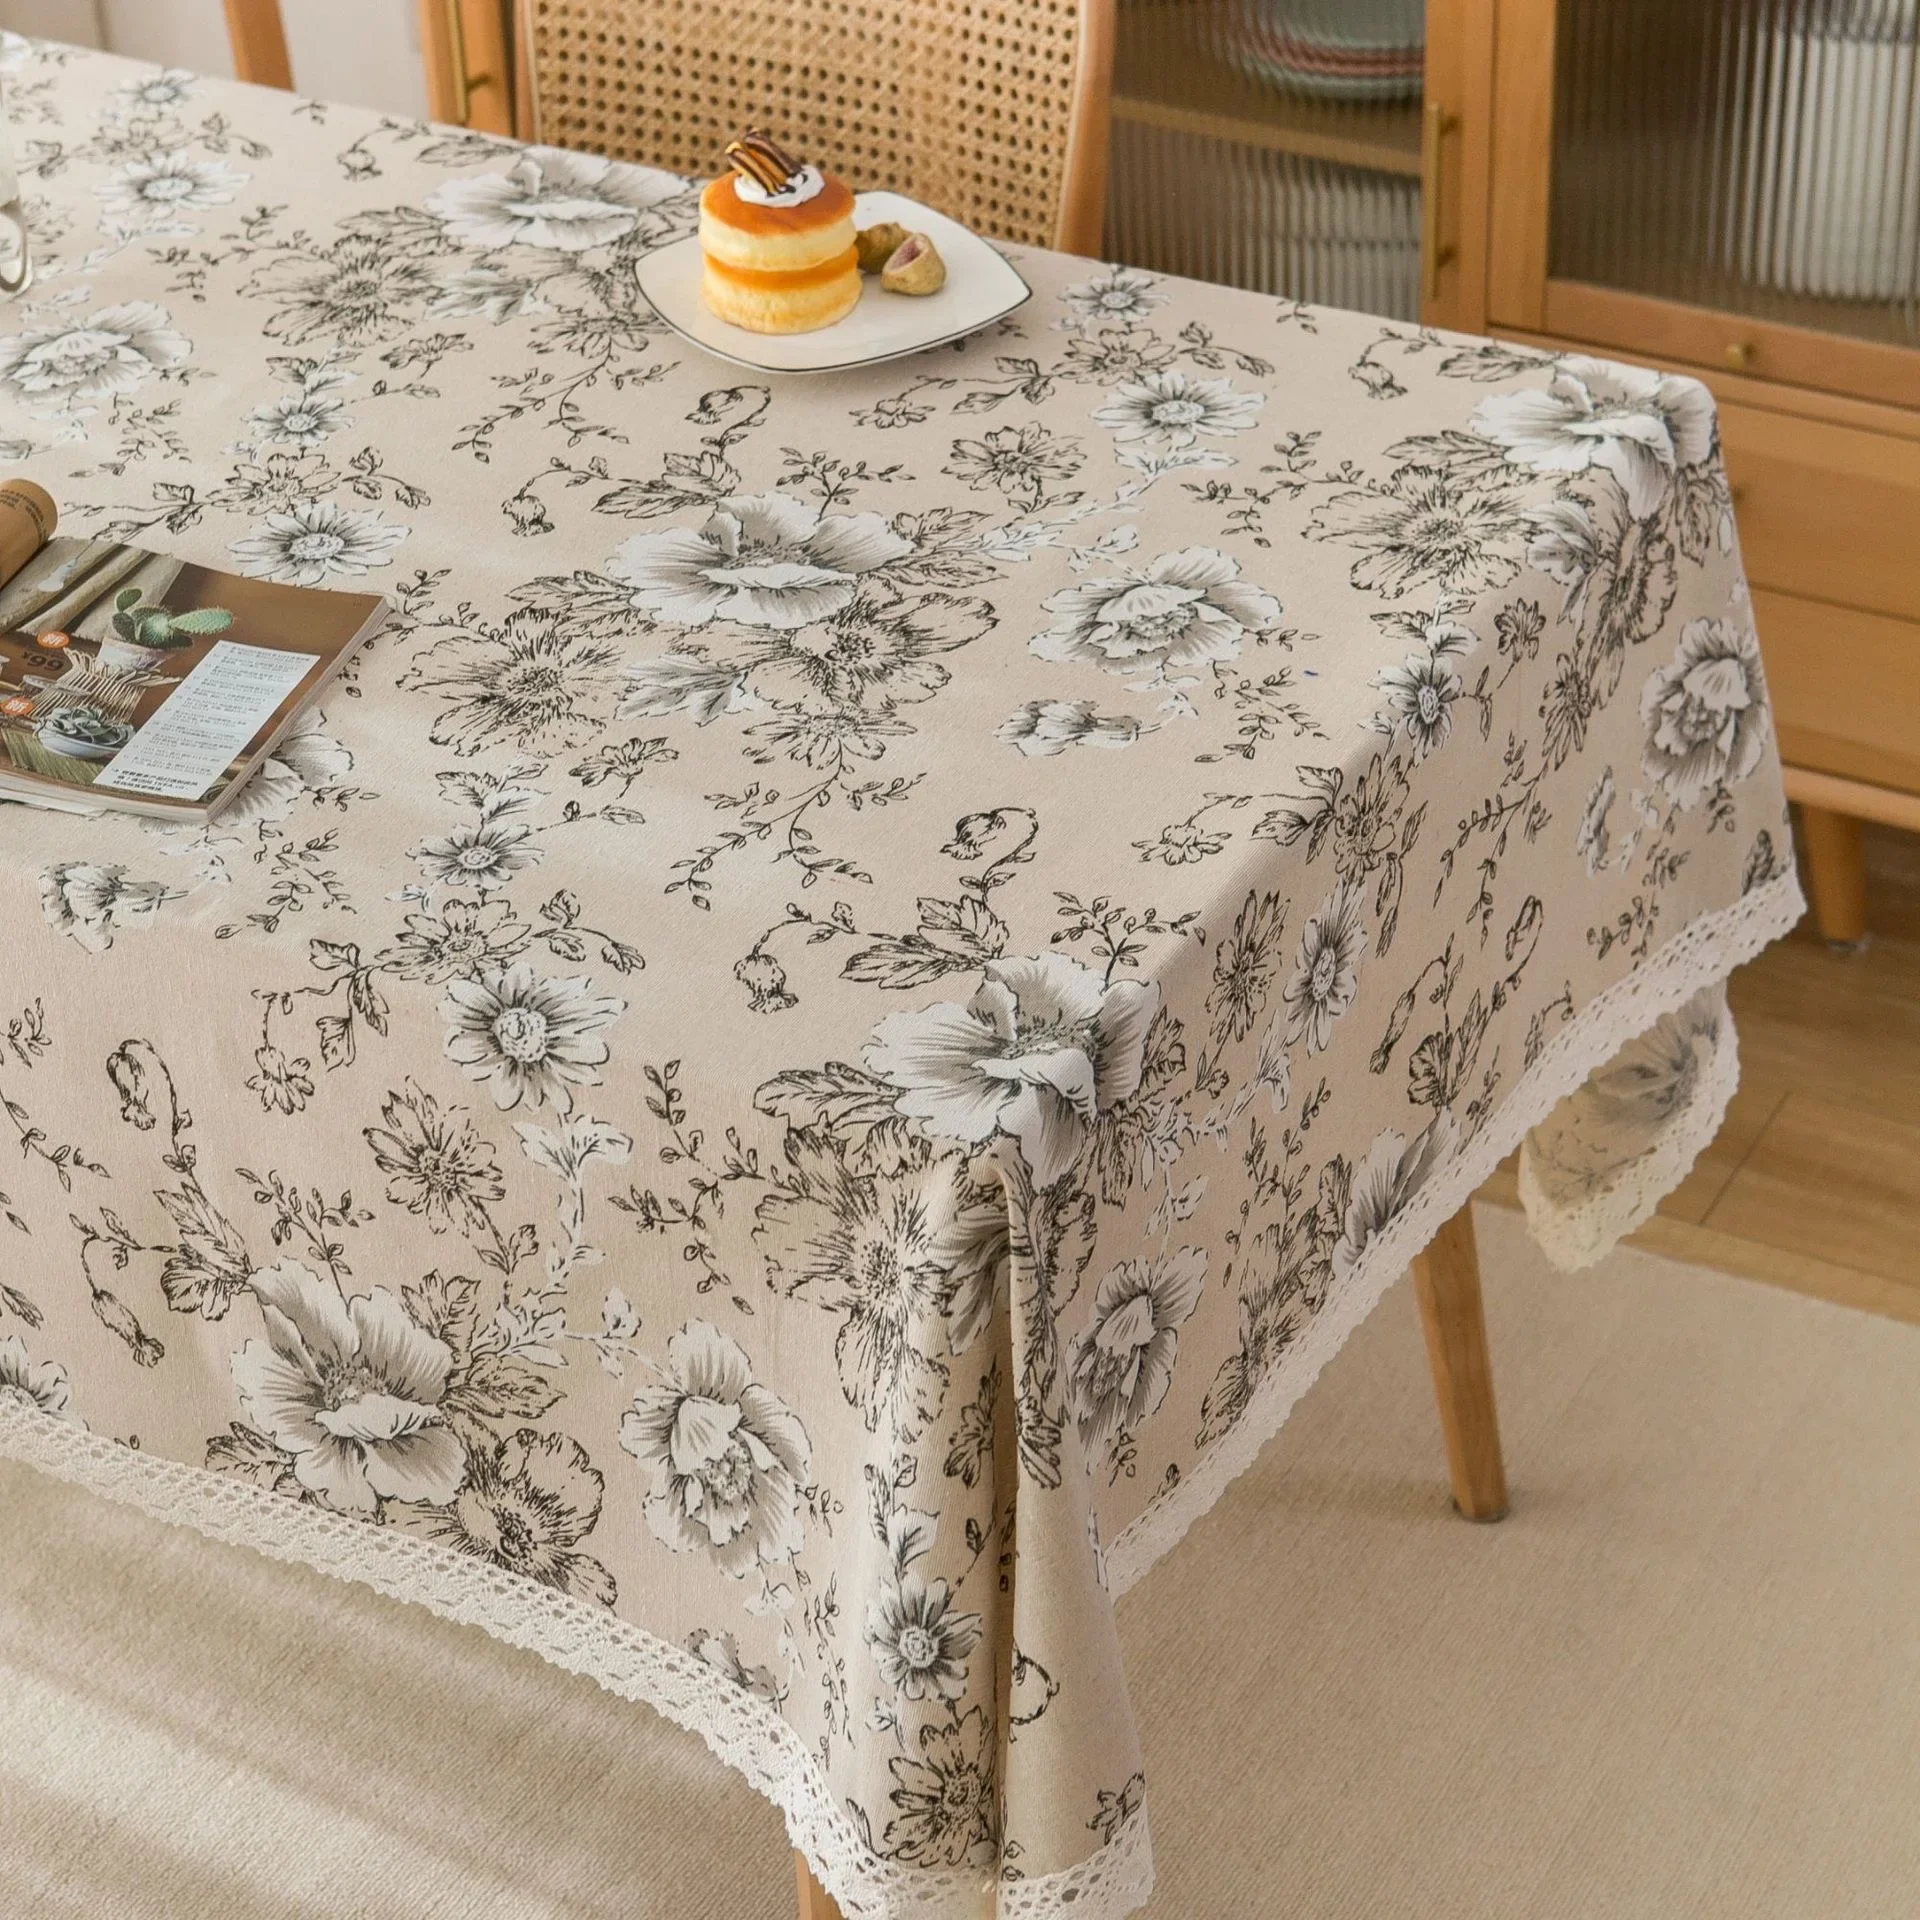 

Small fresh cotton linen tablecloth, tablecloth, household cover, tassel lace J6S232